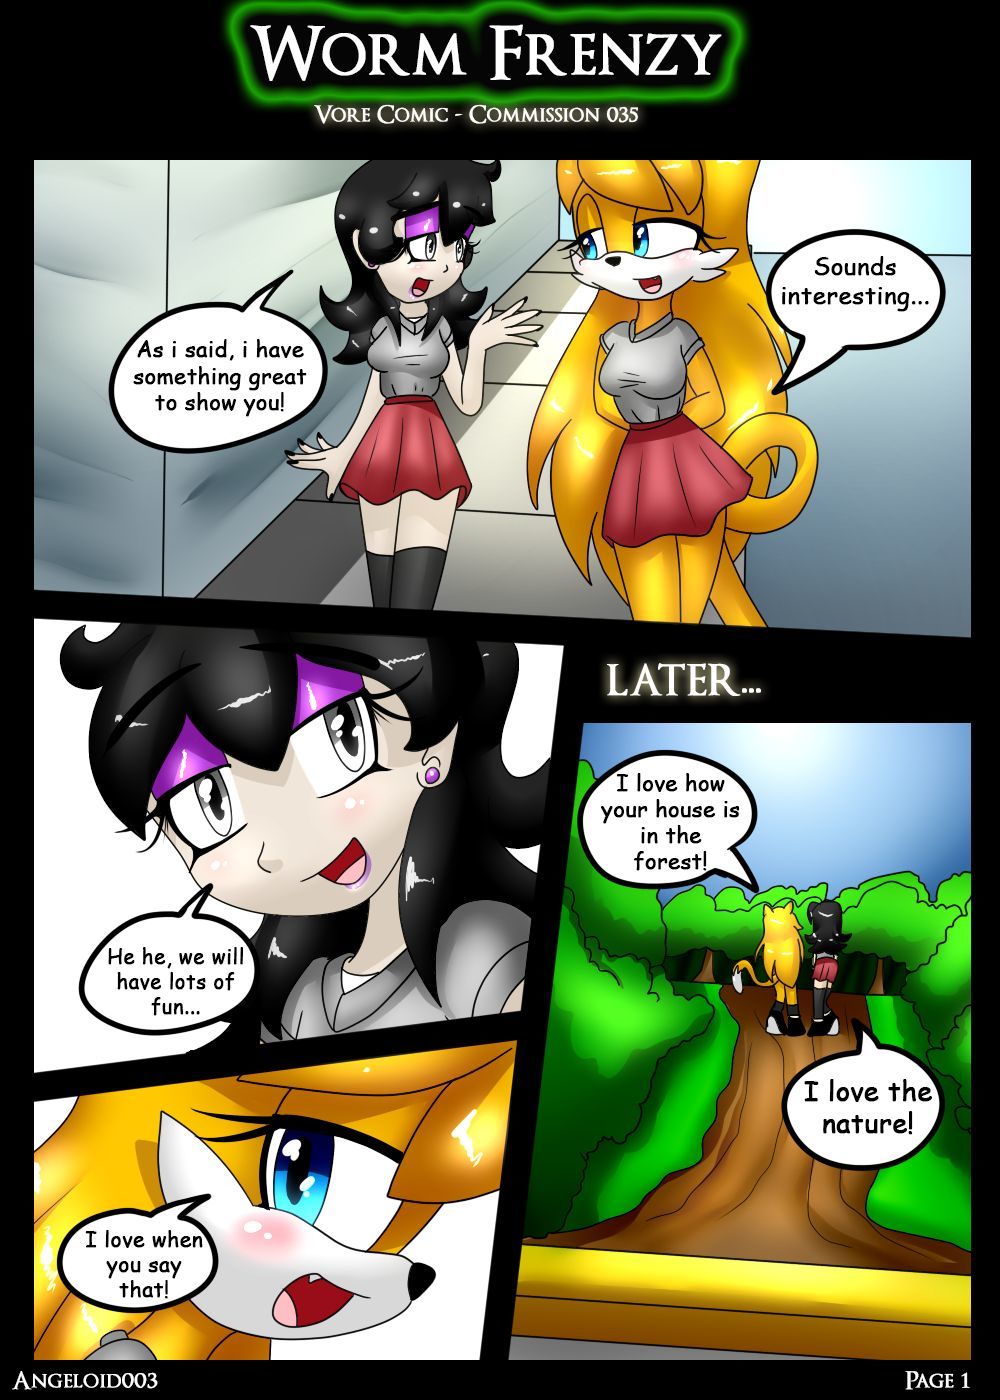 Worm Frenzy - Angeloid003 page 1